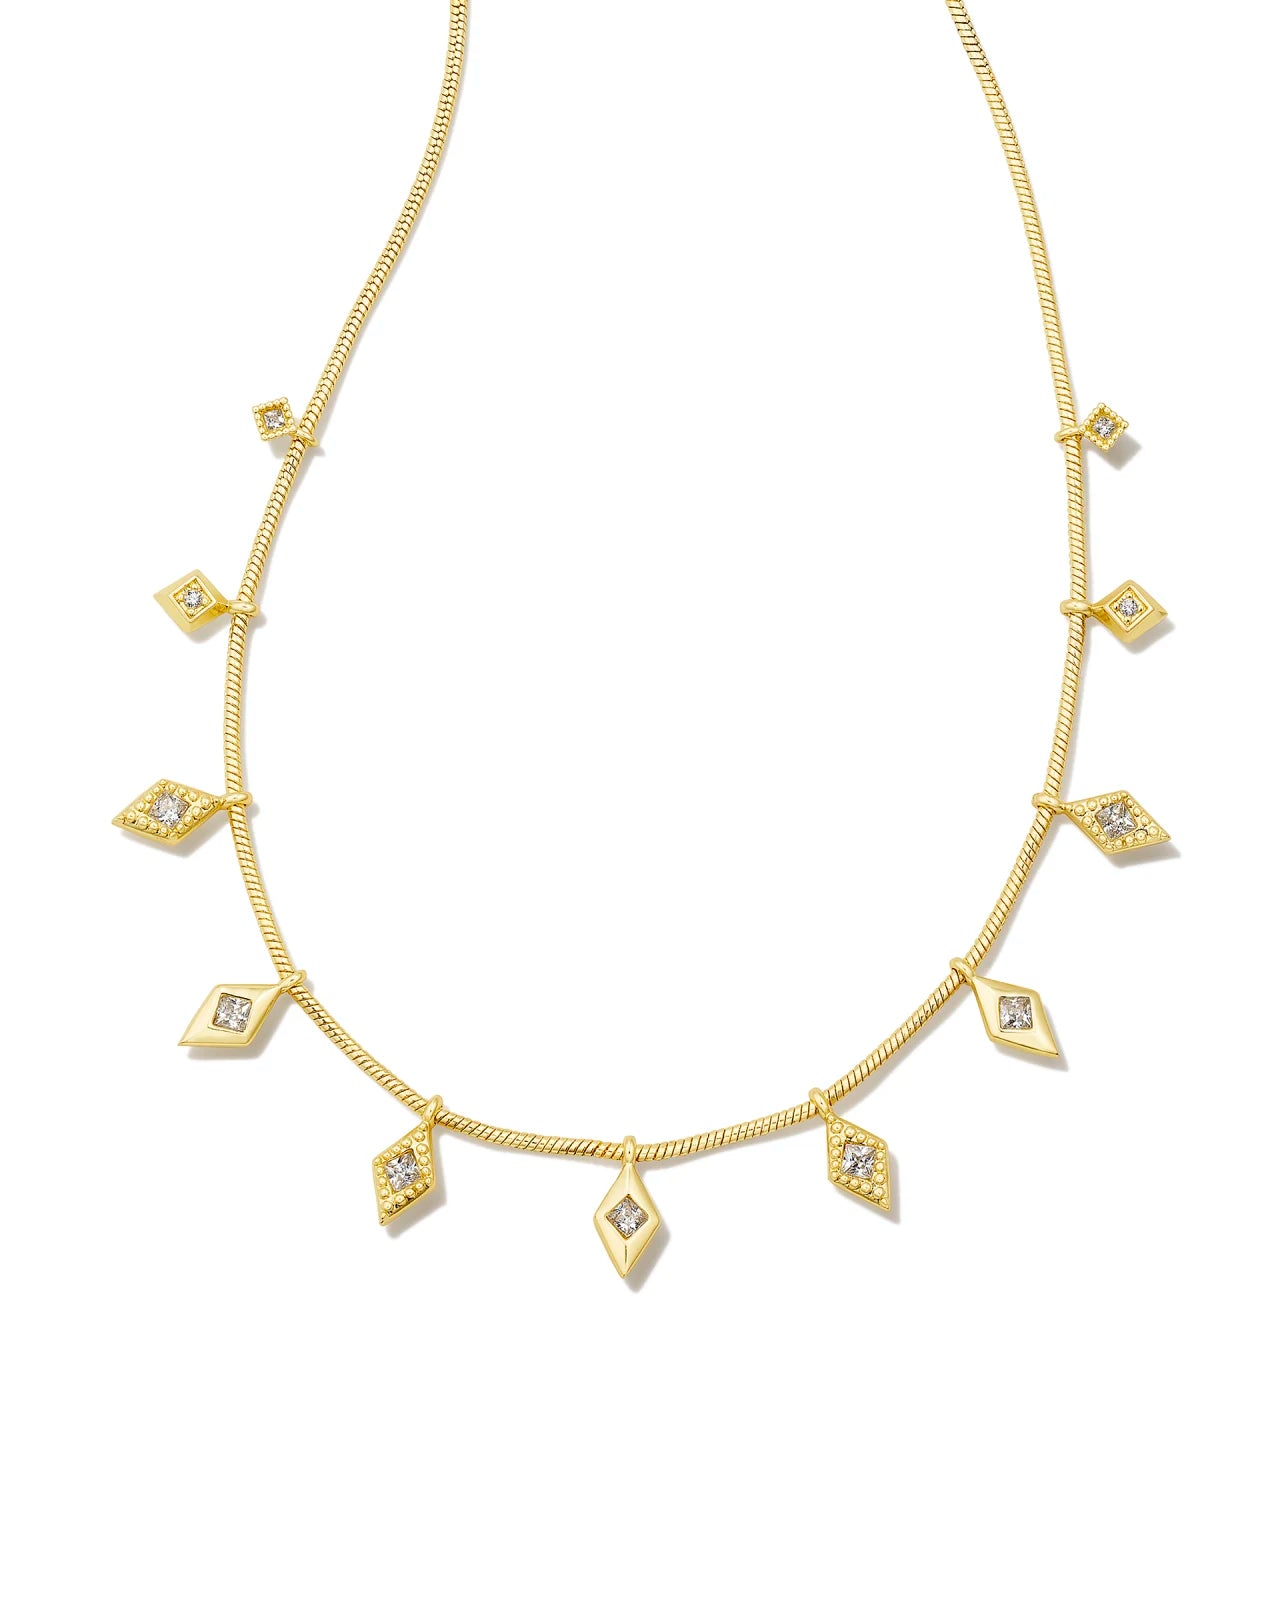 Kendra Scott Kinsley Strand Necklace Gold White CZ-Necklaces-Kendra Scott-N00326GLD-The Twisted Chandelier